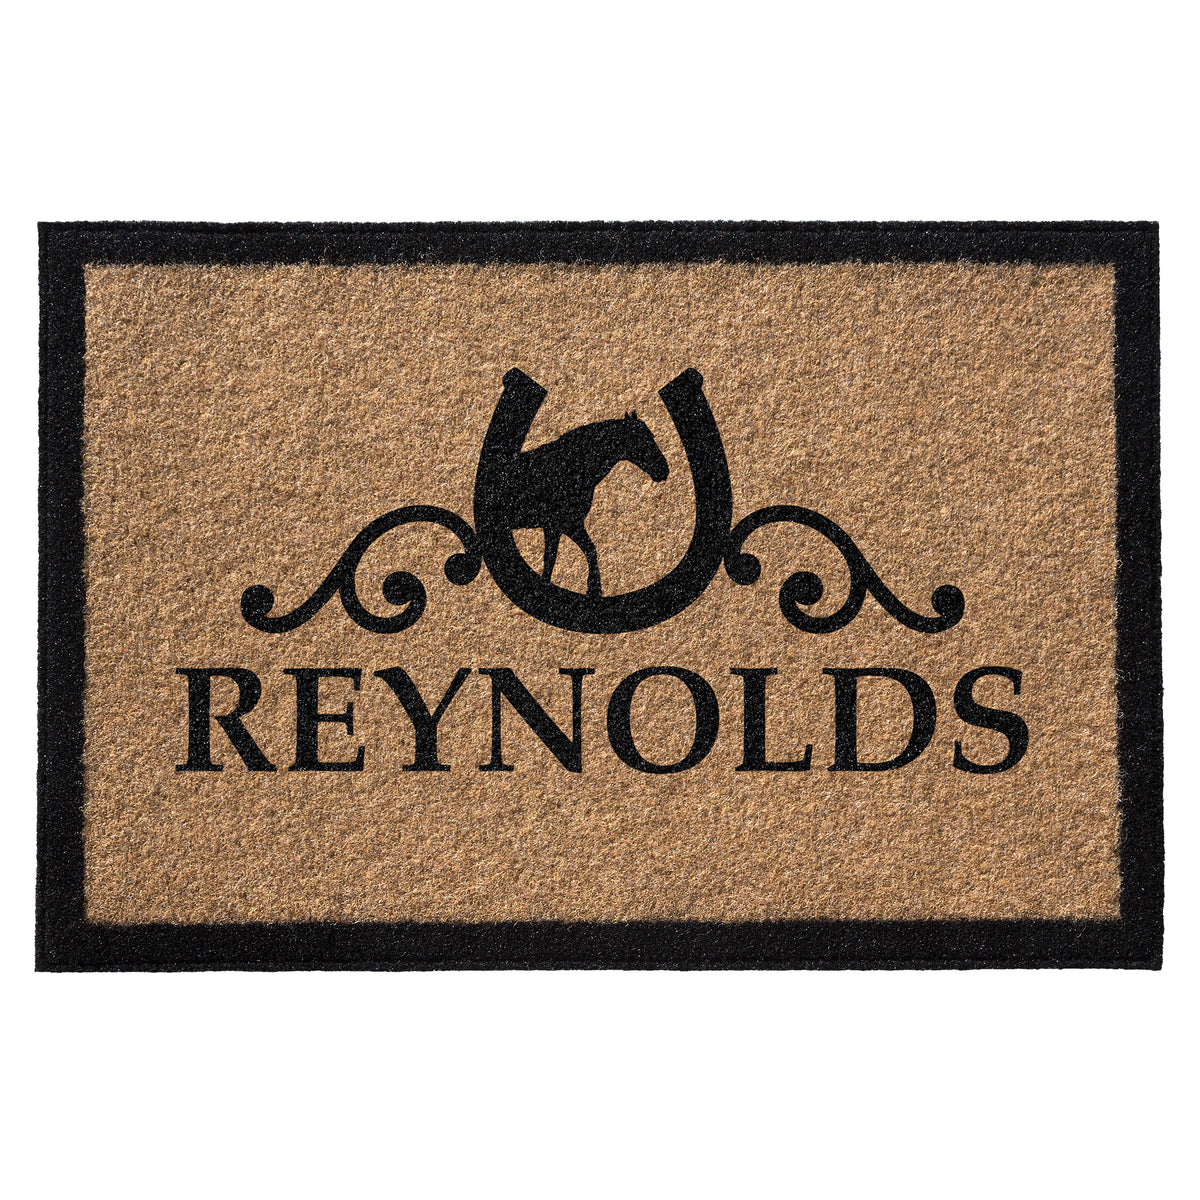 Infinity Custom Mats™ All-Weather Personalized Door Mat - STYLE: REYNOLDS COLOR:TAN - rugsthatfit.com